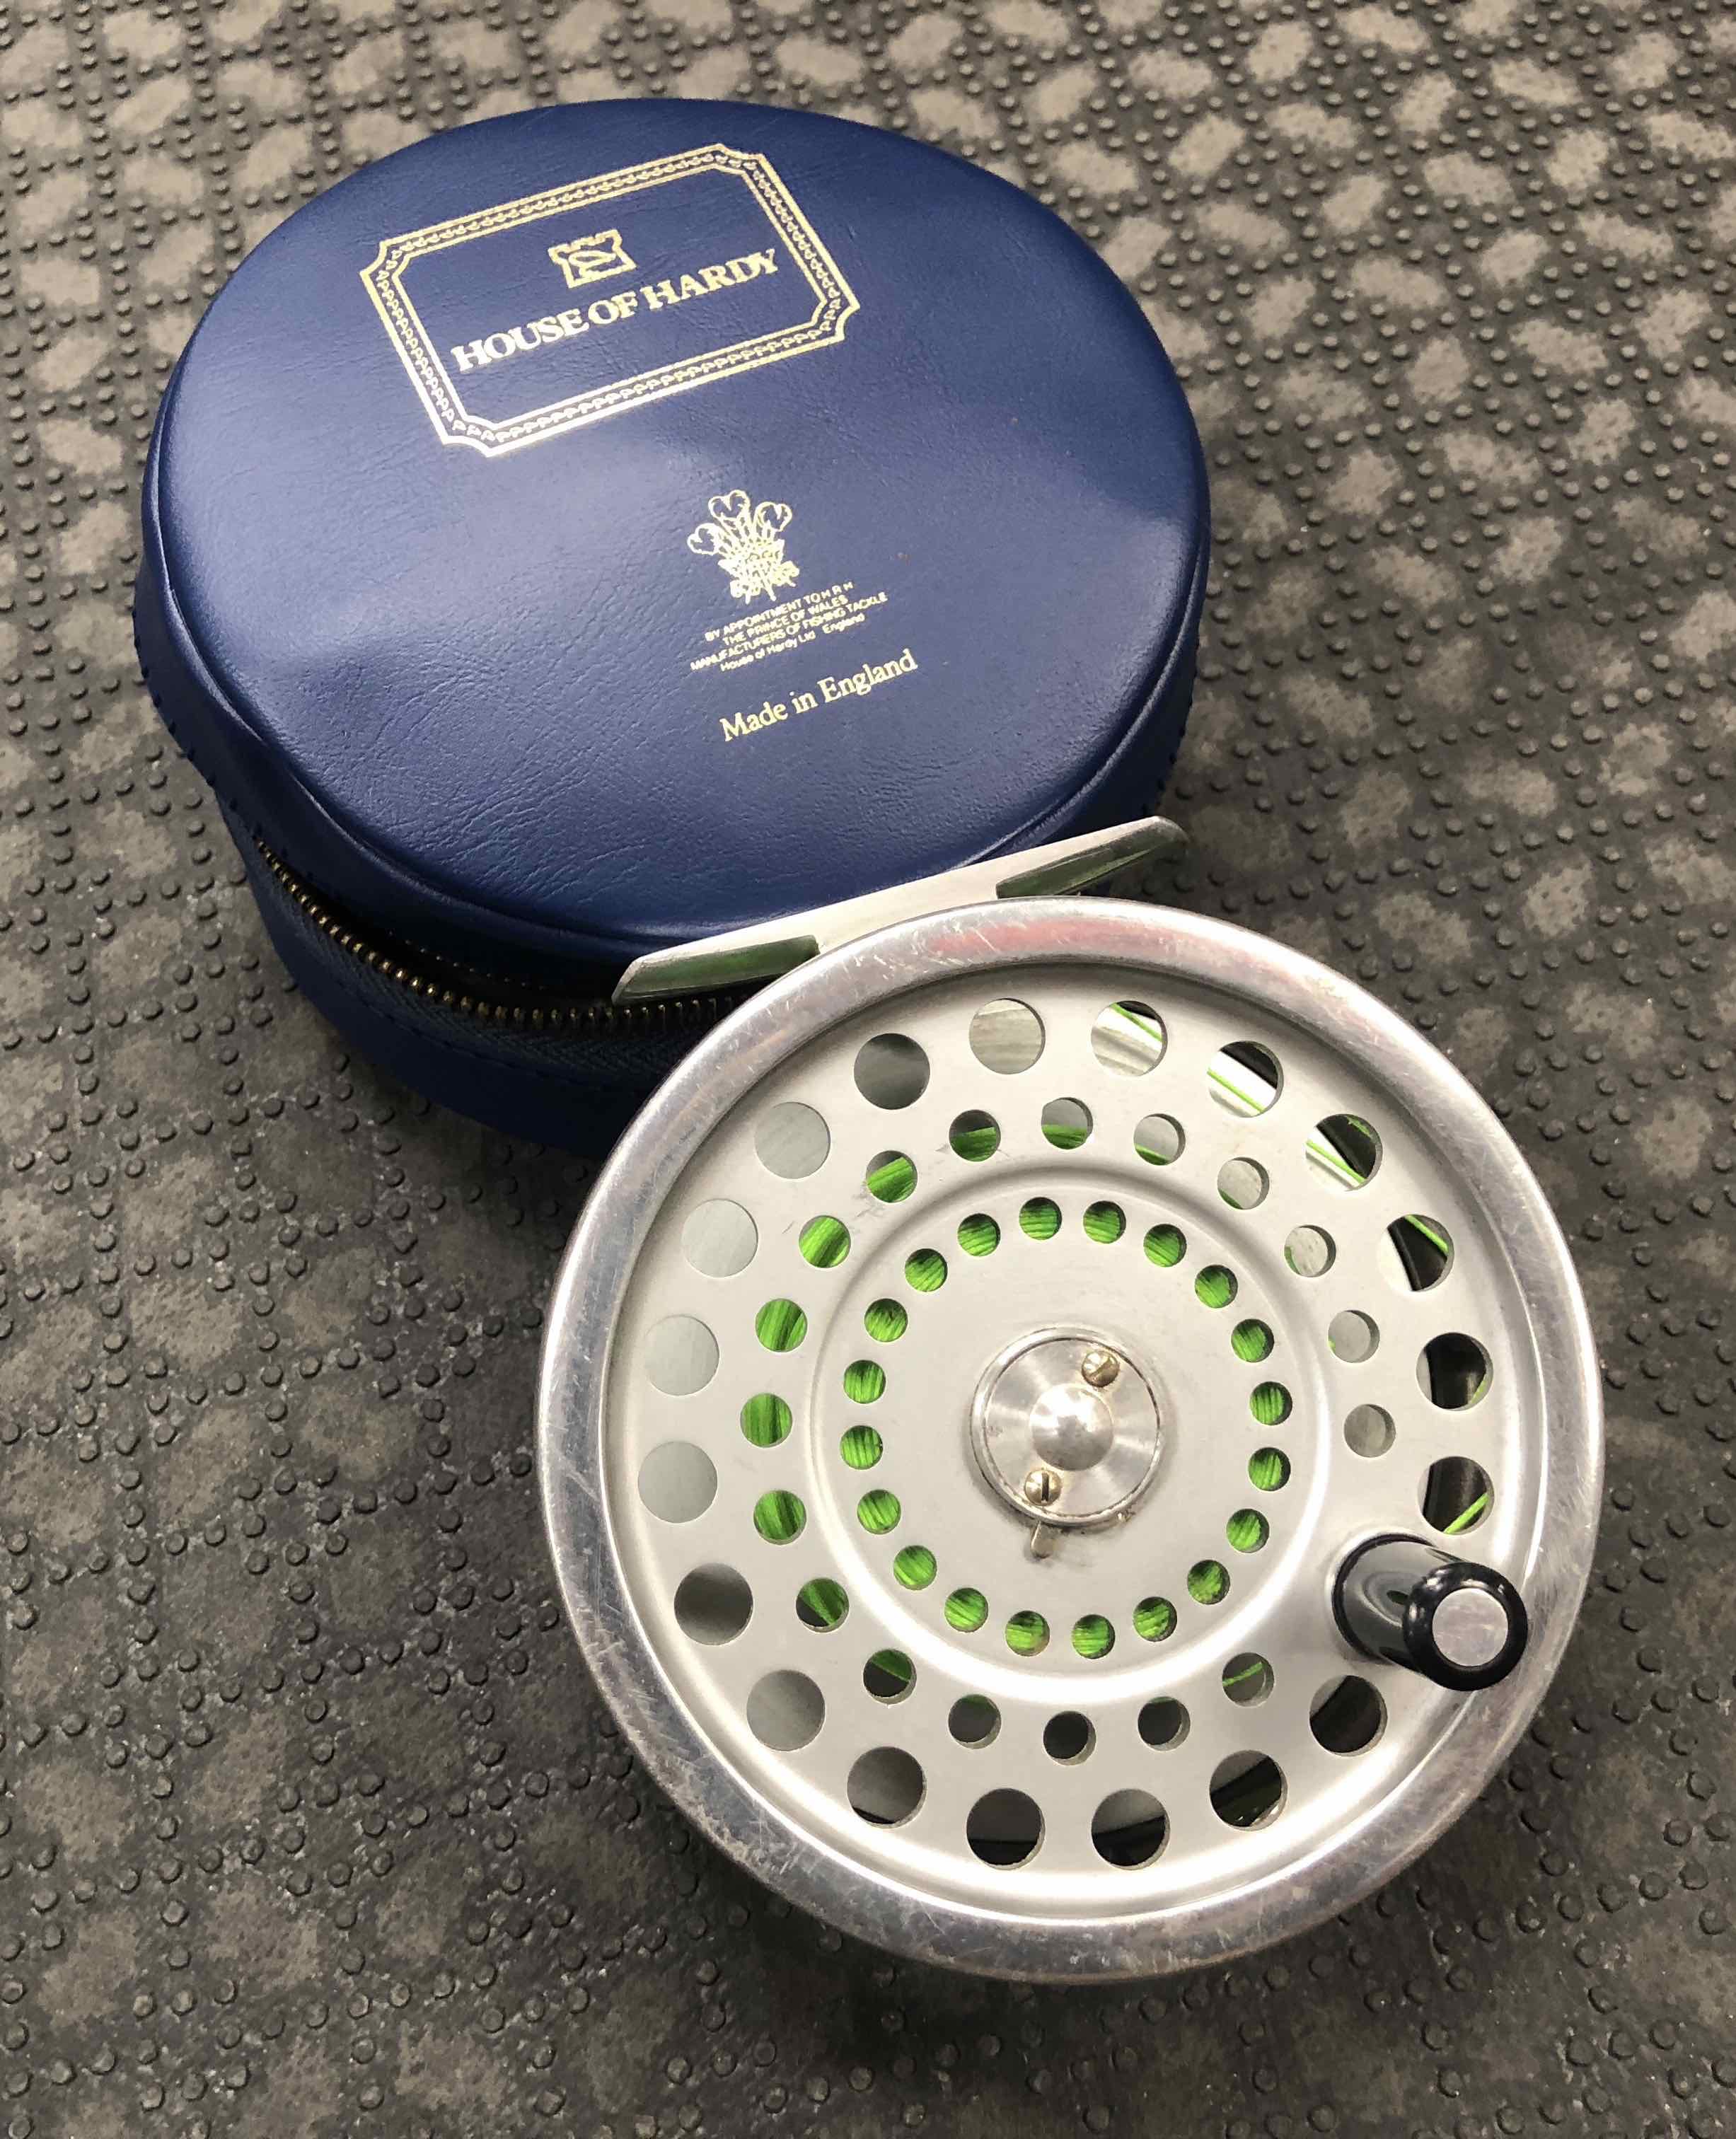 Hardy Marquis Salmon Fly Fishing Reel Product Details